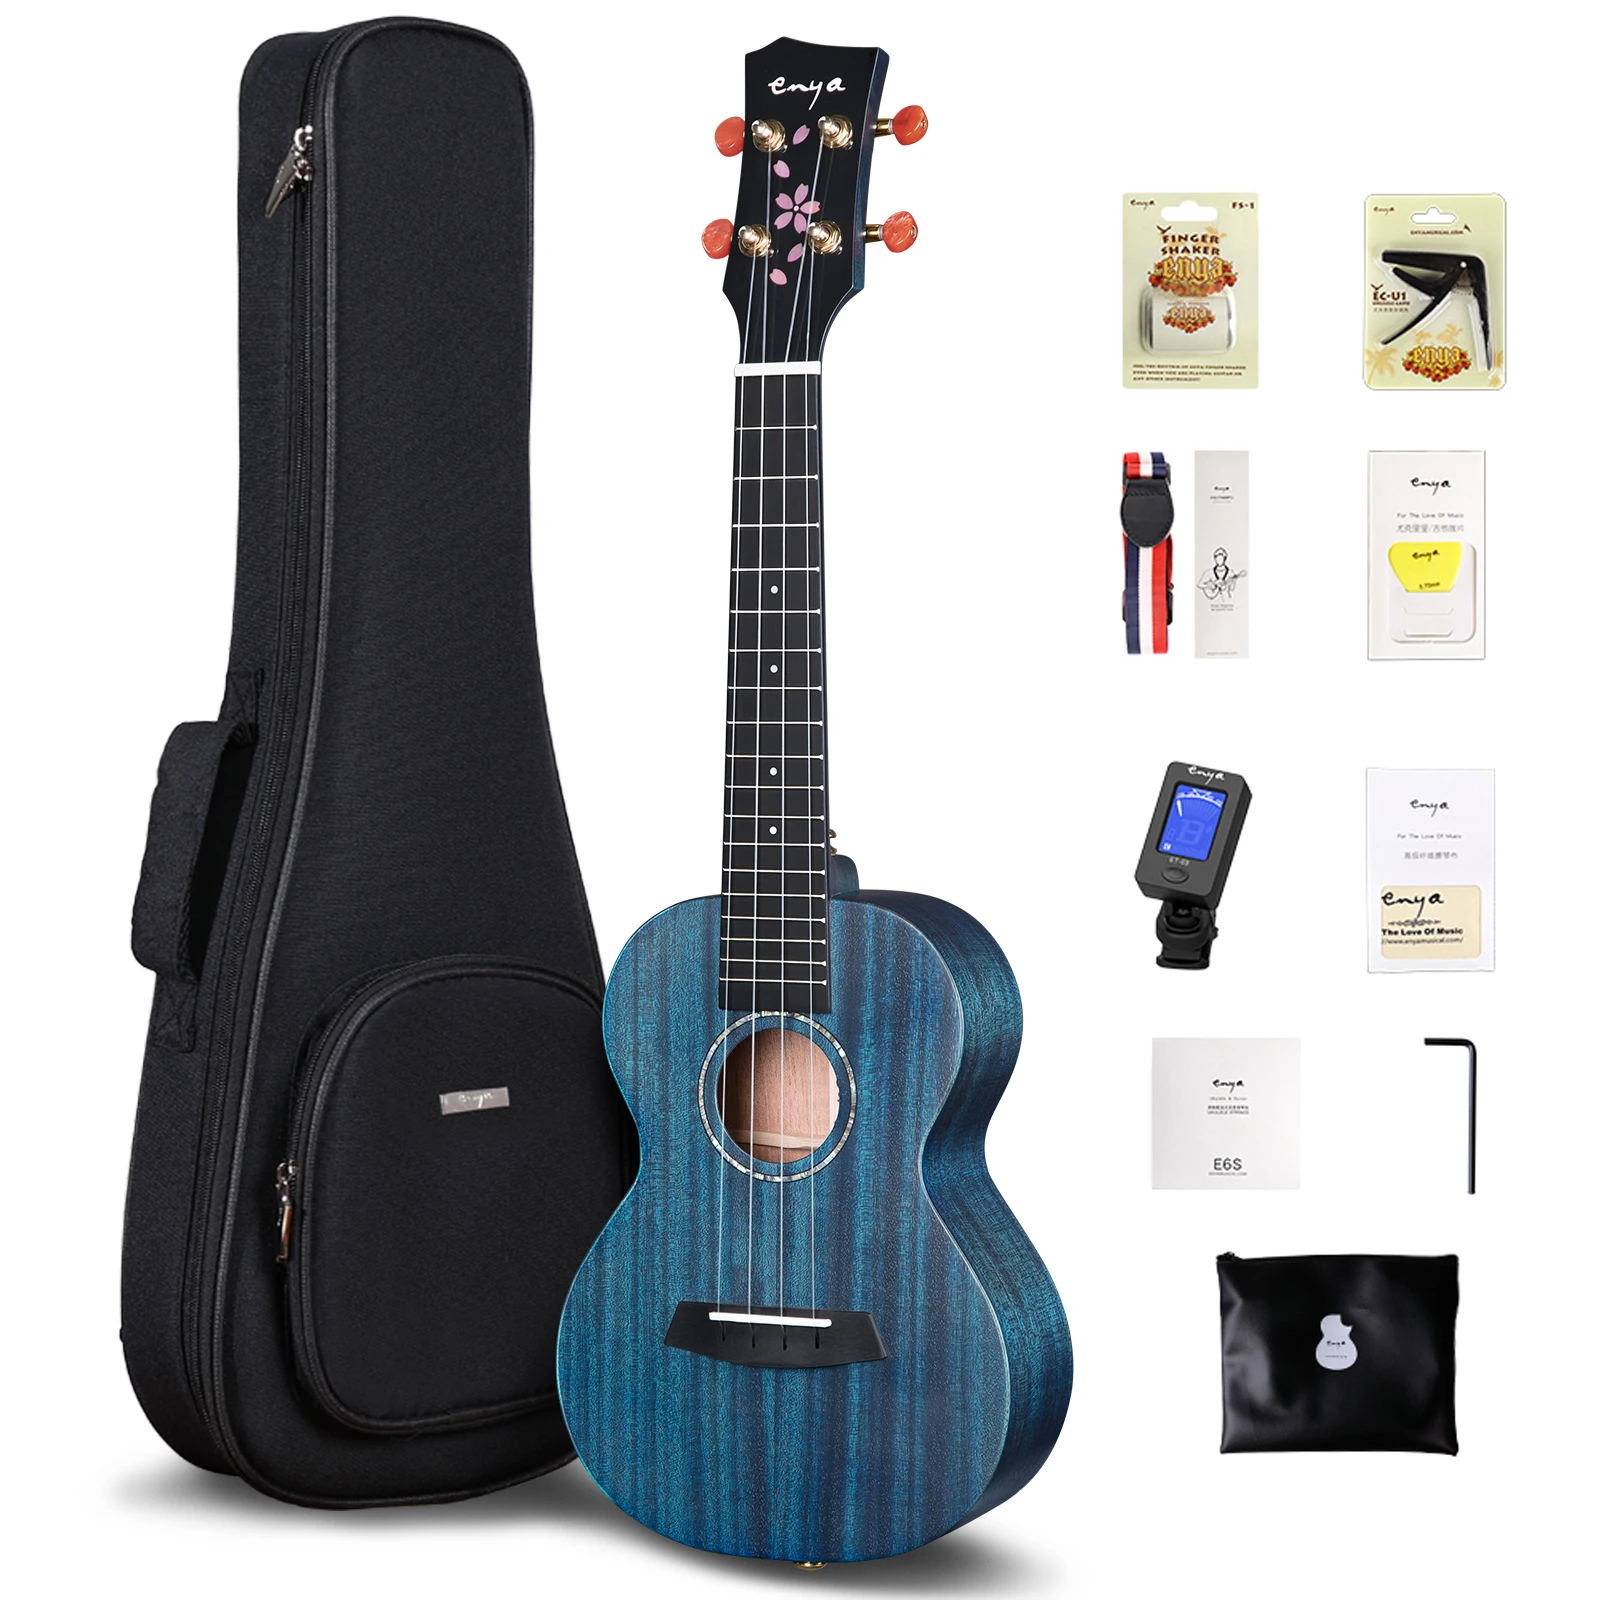 Enya Ukulele Concert Tenor 23 26 All Solid Mahogany Ukelele Accessories with Cherry Blossom Inlay including Cotton Bag and Tuner